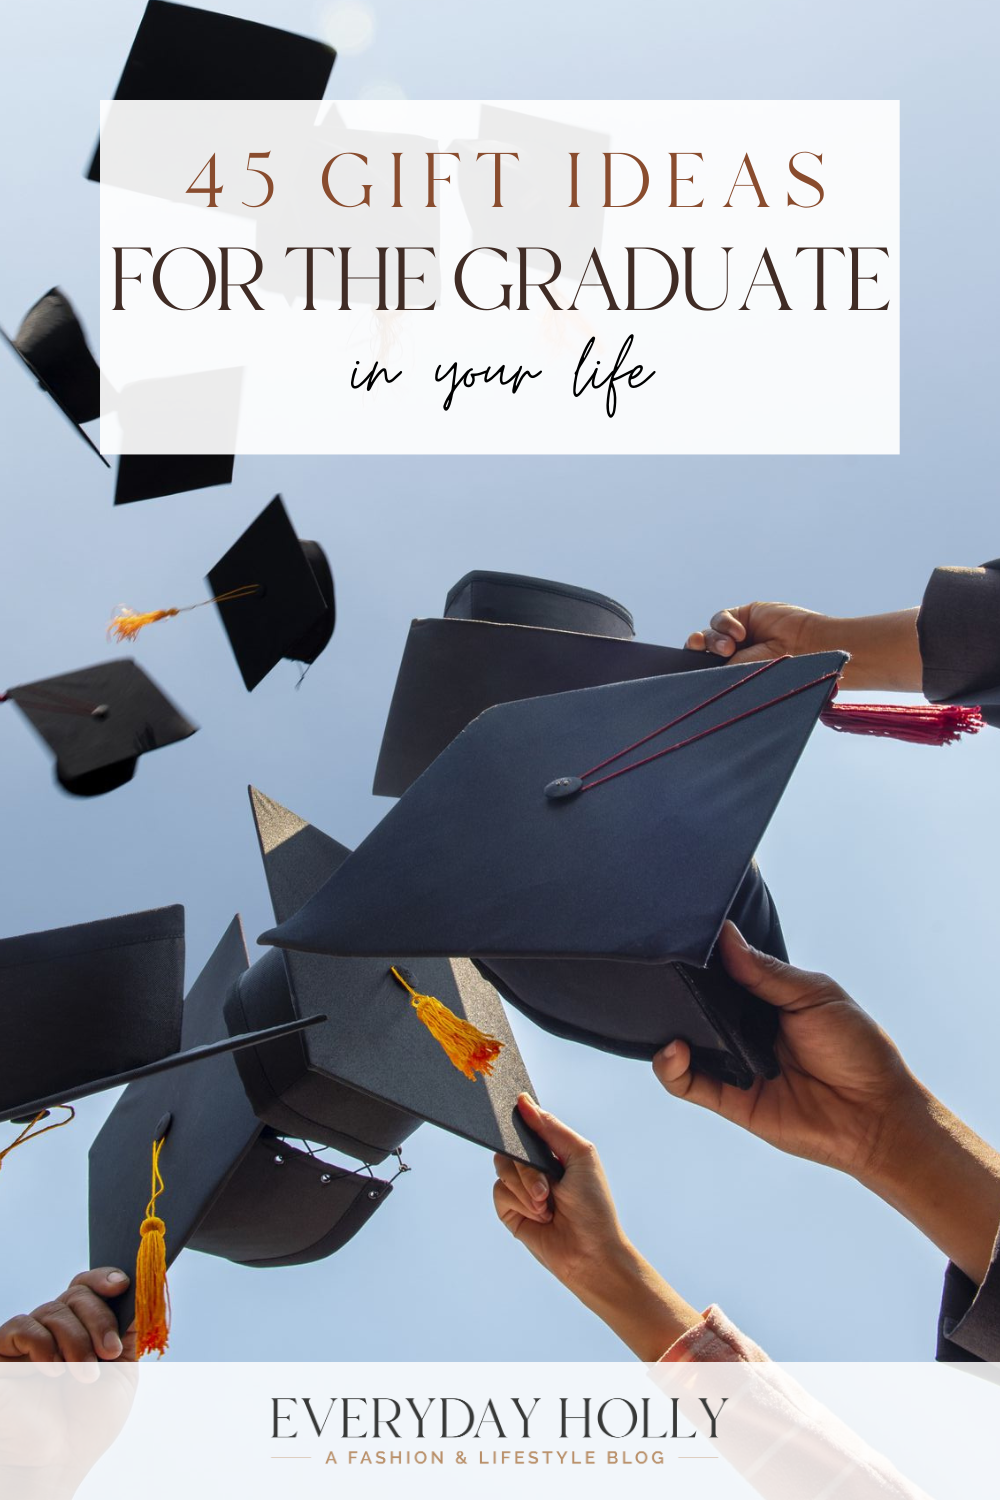 45 gift ideas for the graduate in your life | gift guide, gift ideas, graduation gift, graduate, high school grad, college grad